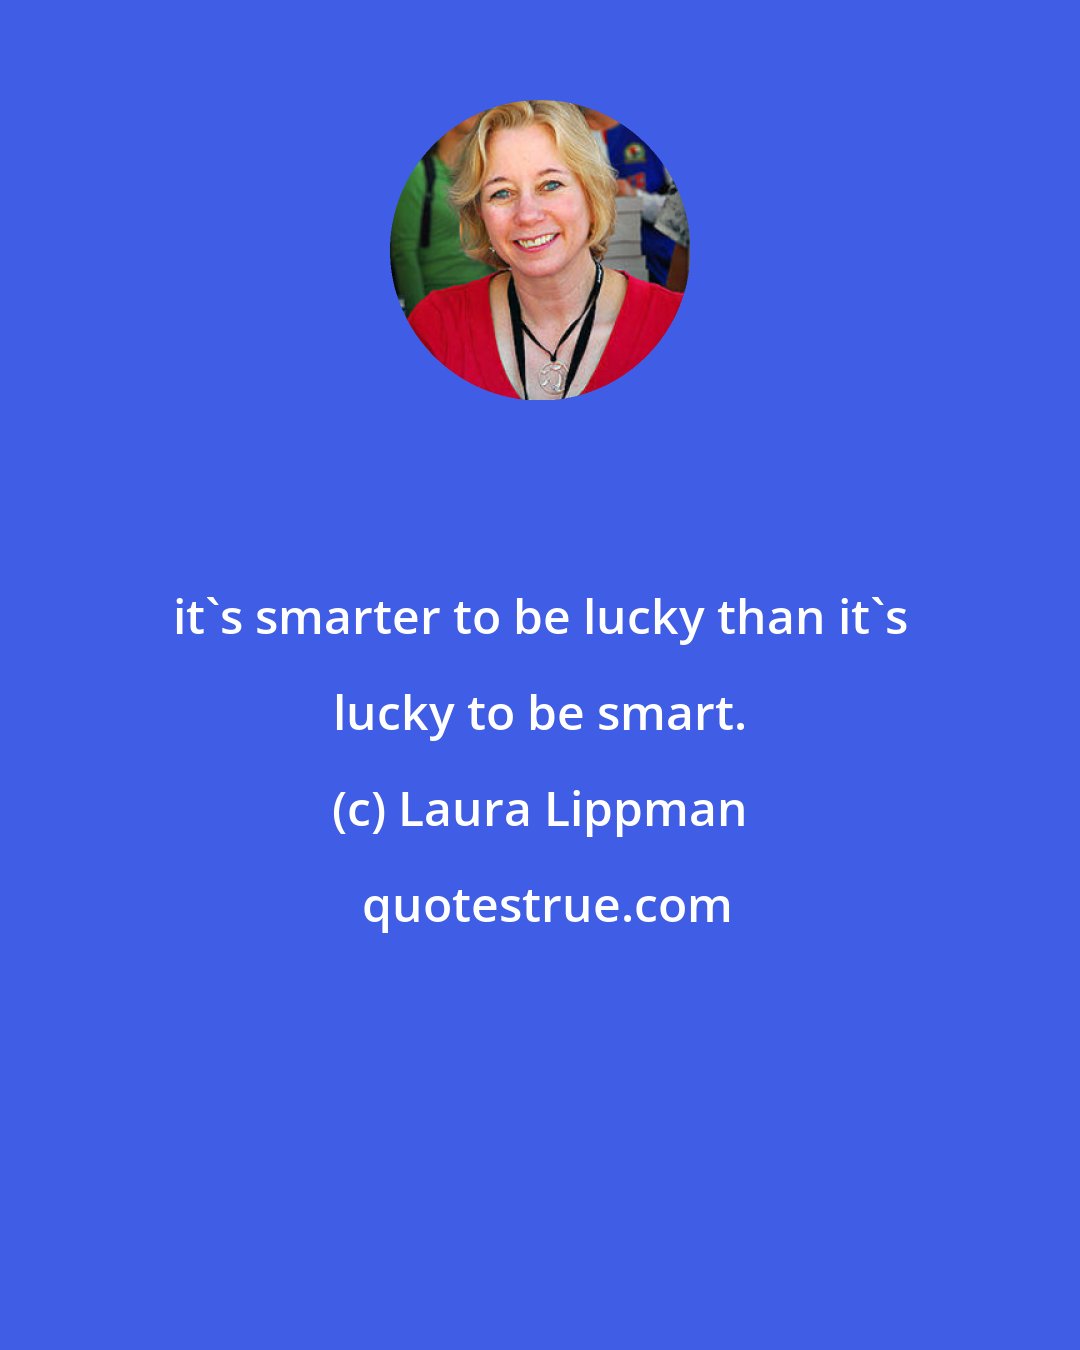 Laura Lippman: it's smarter to be lucky than it's lucky to be smart.